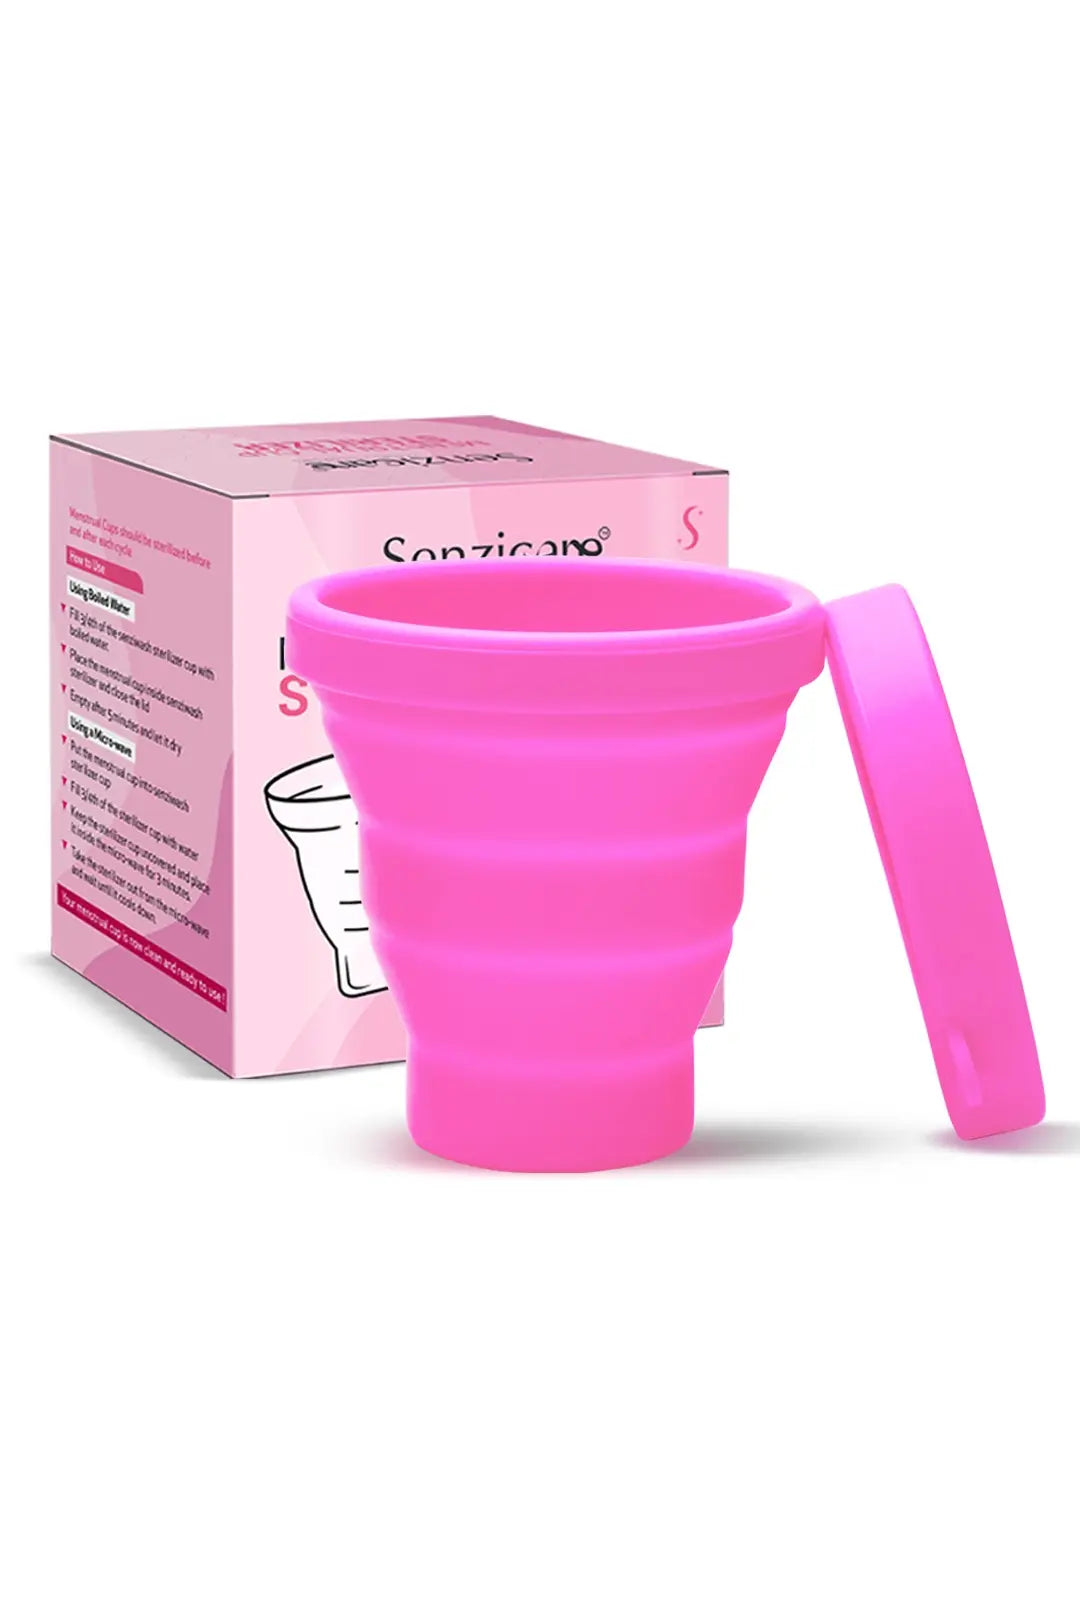 Menstrual Cup Sterilizer Container for Women